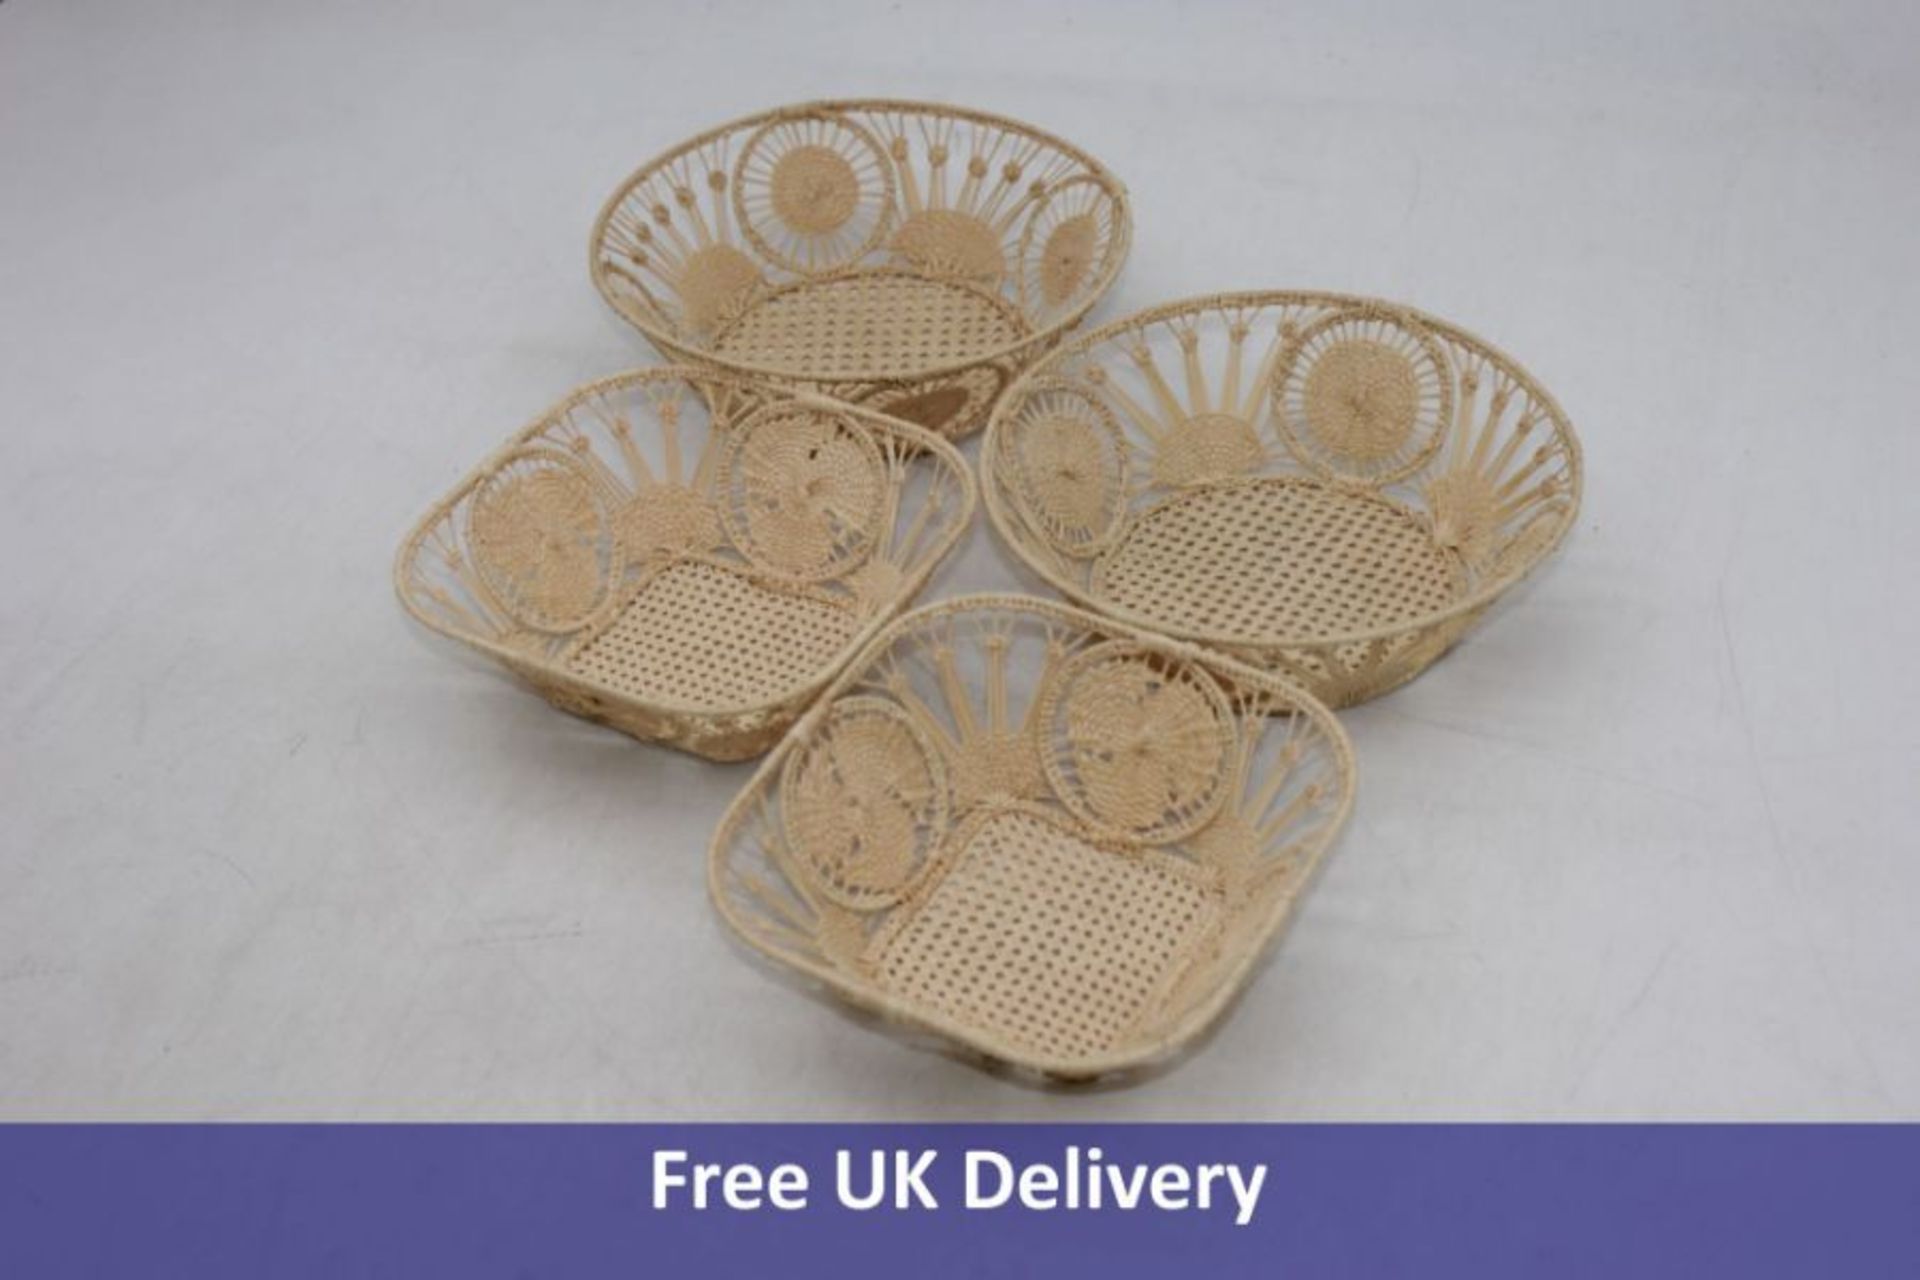 Four Cabana Wicker Bread Baskets to include 2x Square 2x Round, Natural Colour